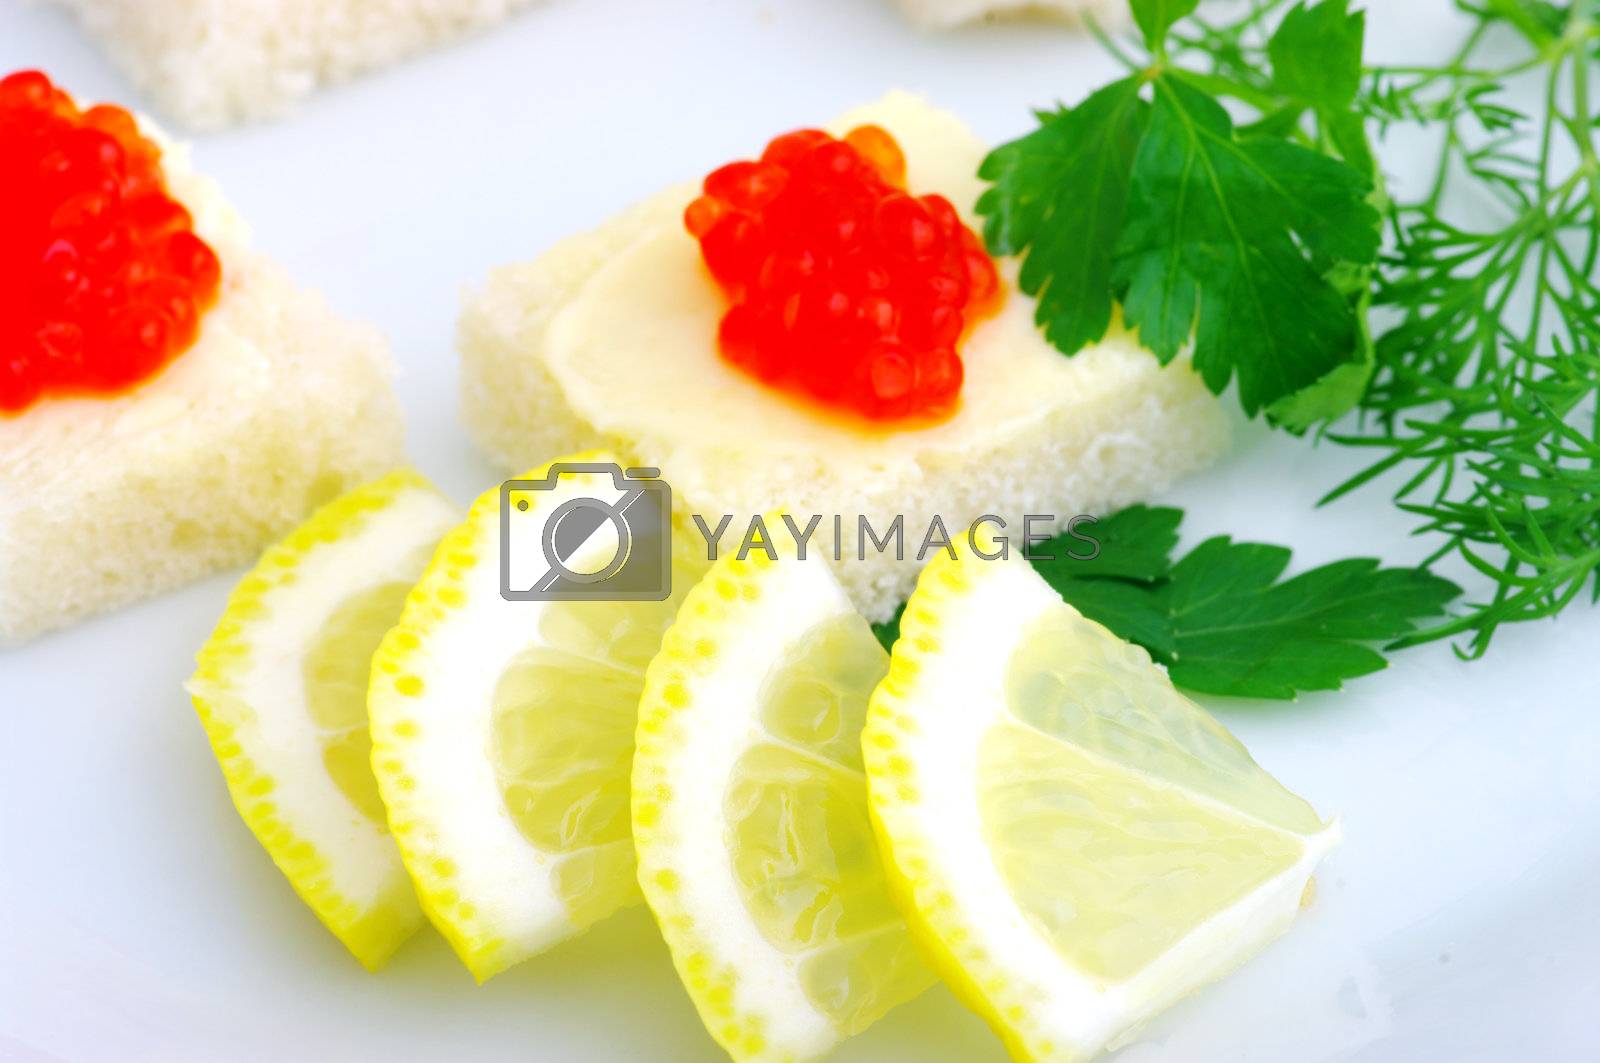 Royalty free image of Sandwiches with red caviar and greens on a white plate  by dolnikow